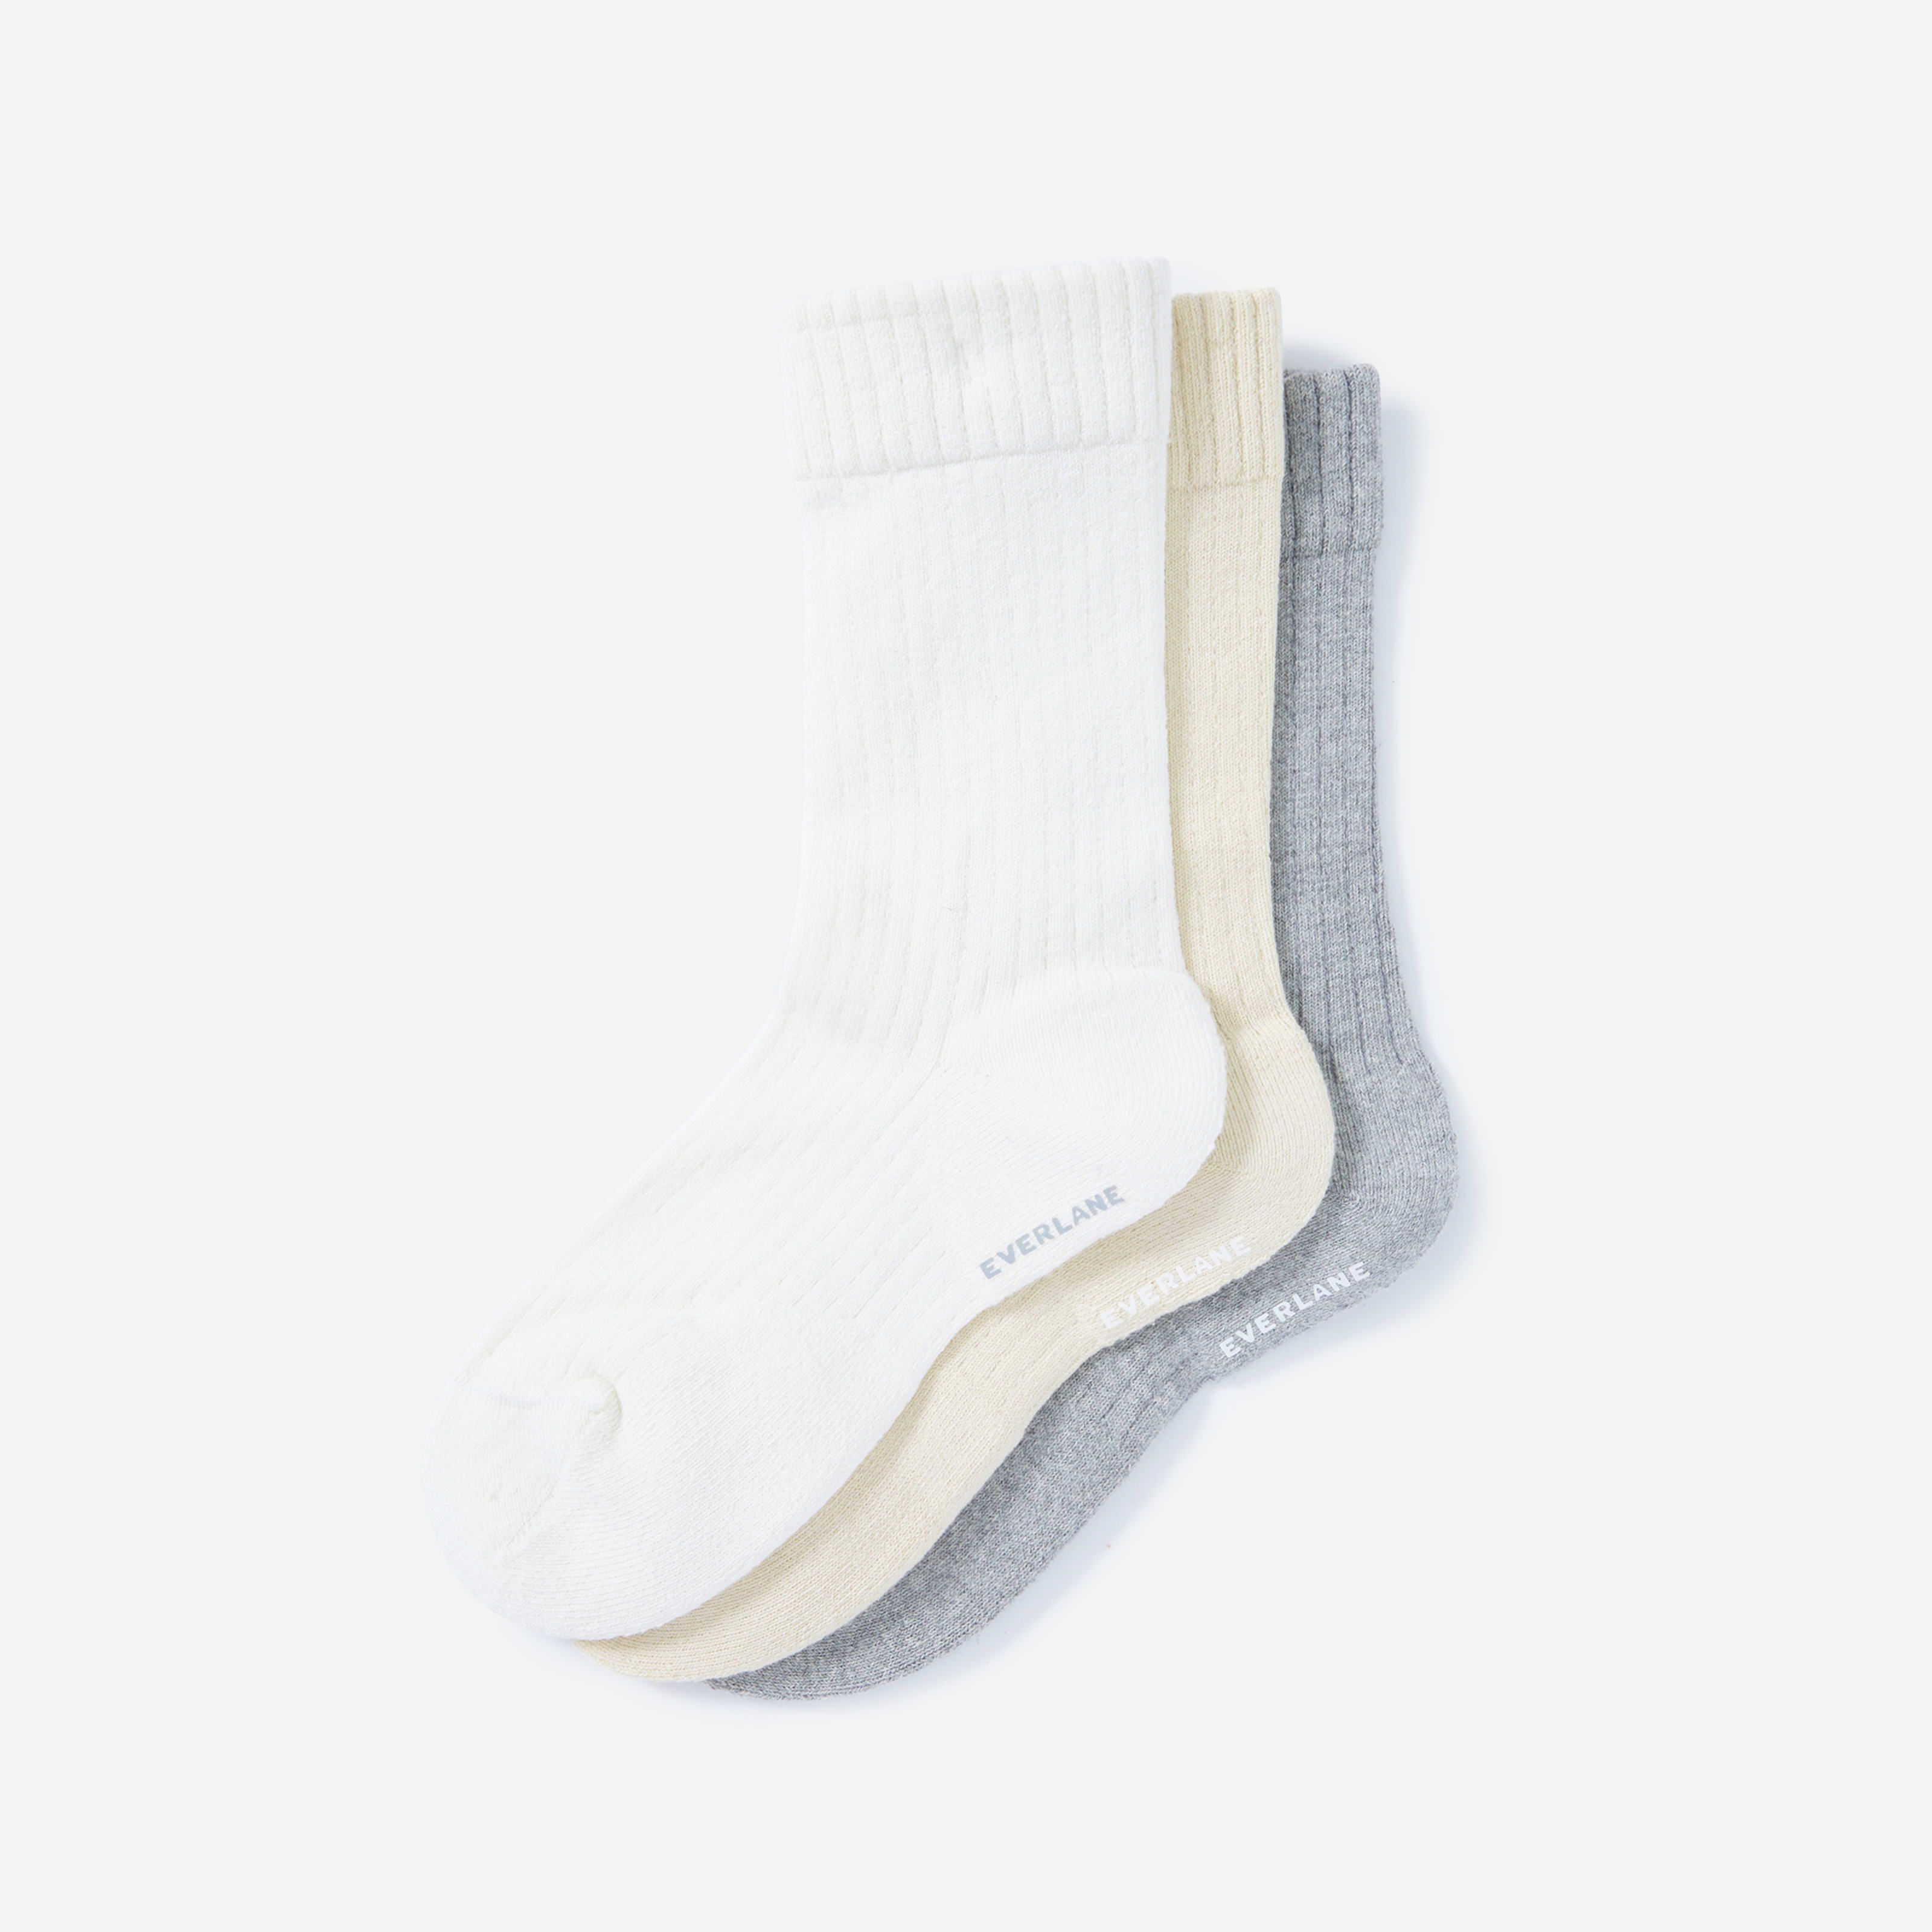 Organic Cotton Ribbed Crew Sock 3-Pack by Everlane in Neutral Multi, Size M | Everlane